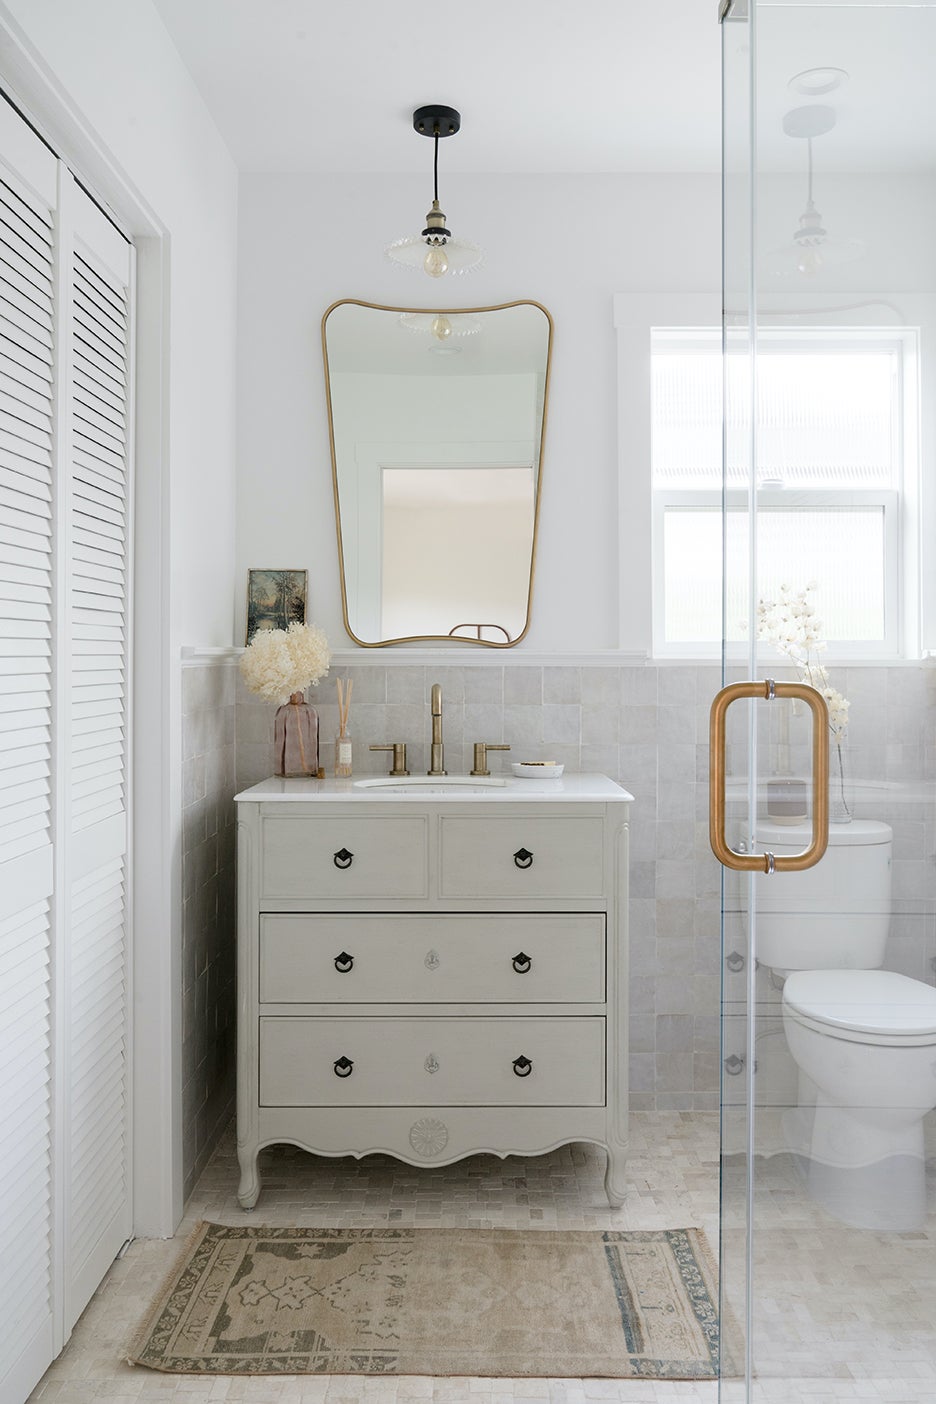 Clean white bathroom with dresser as a vanity